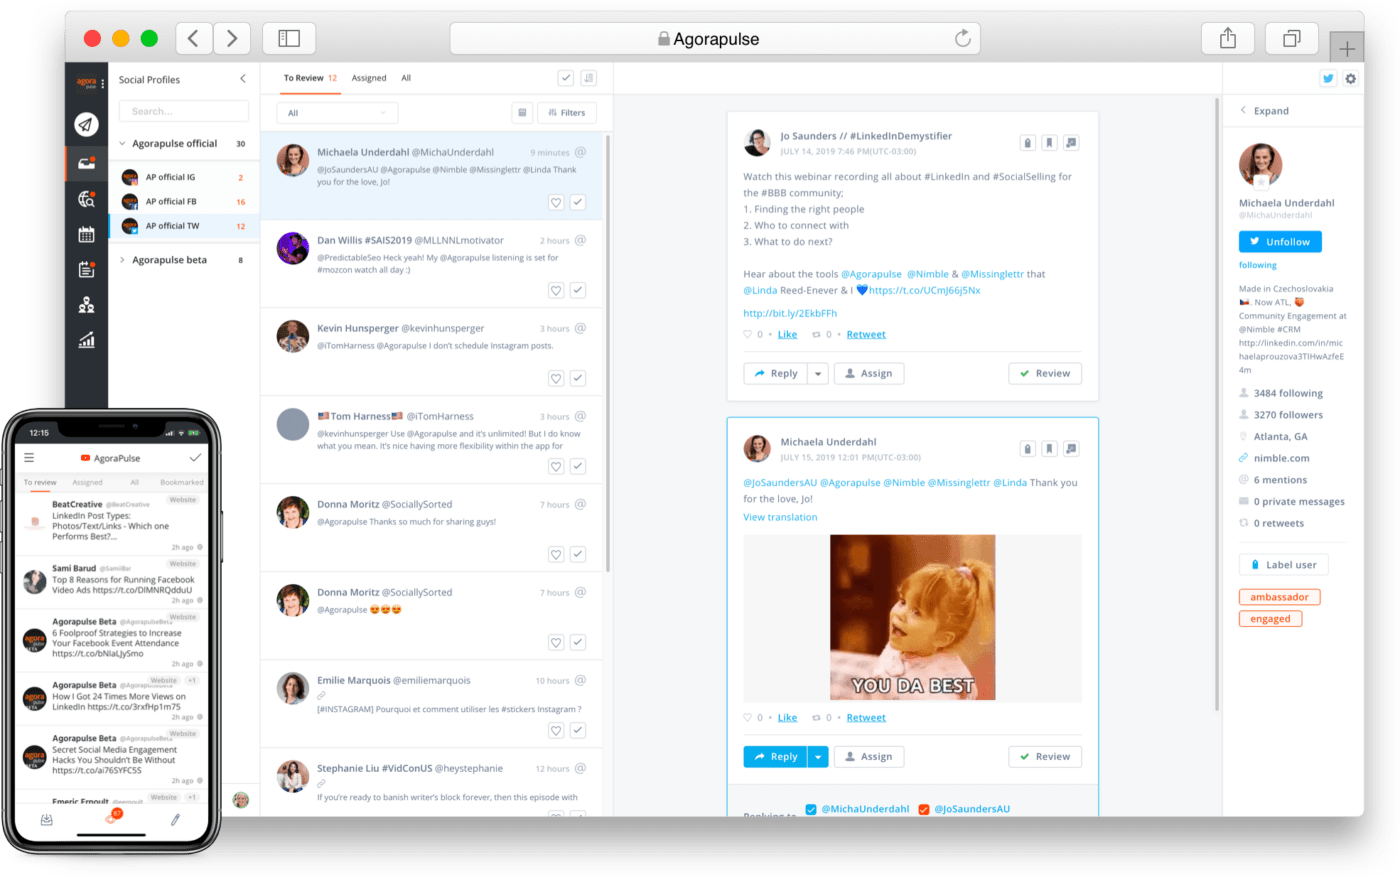 Twitter’s social profile in Agorapulse’s desktop view and Agorapulse's mobile view